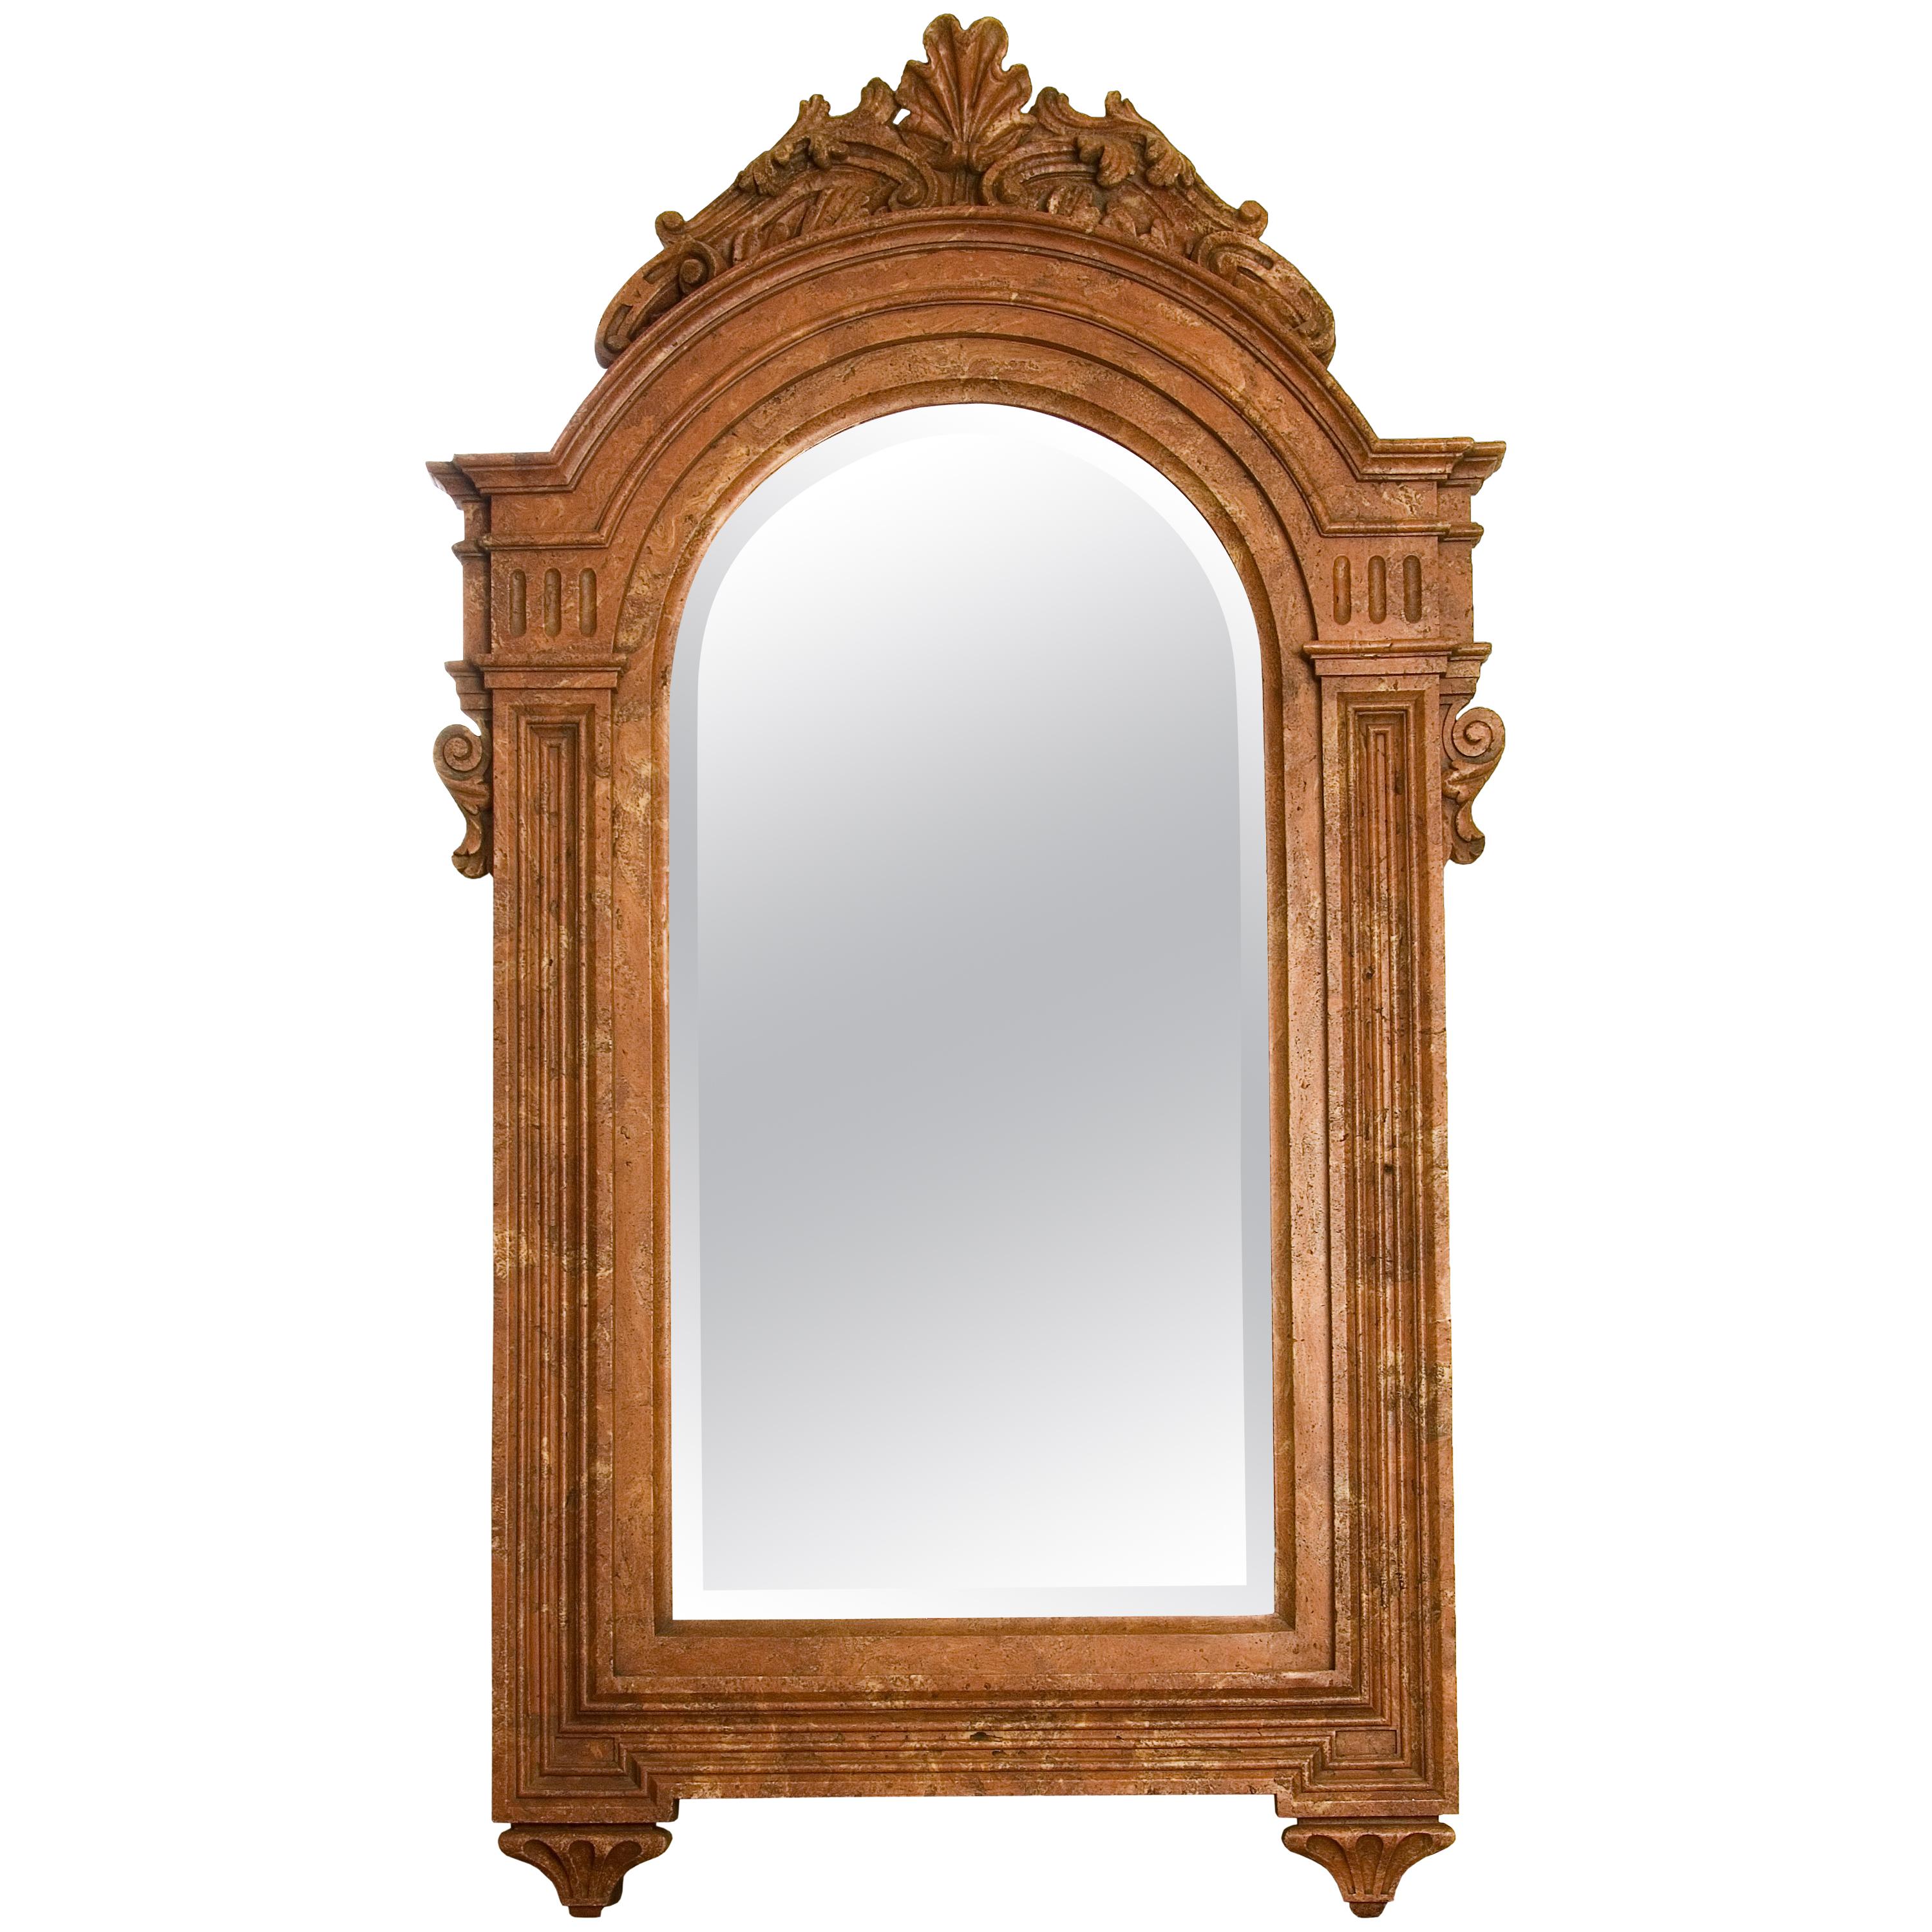 Renaissance Style Mirror, Marble Dust Patina, 20th Century For Sale